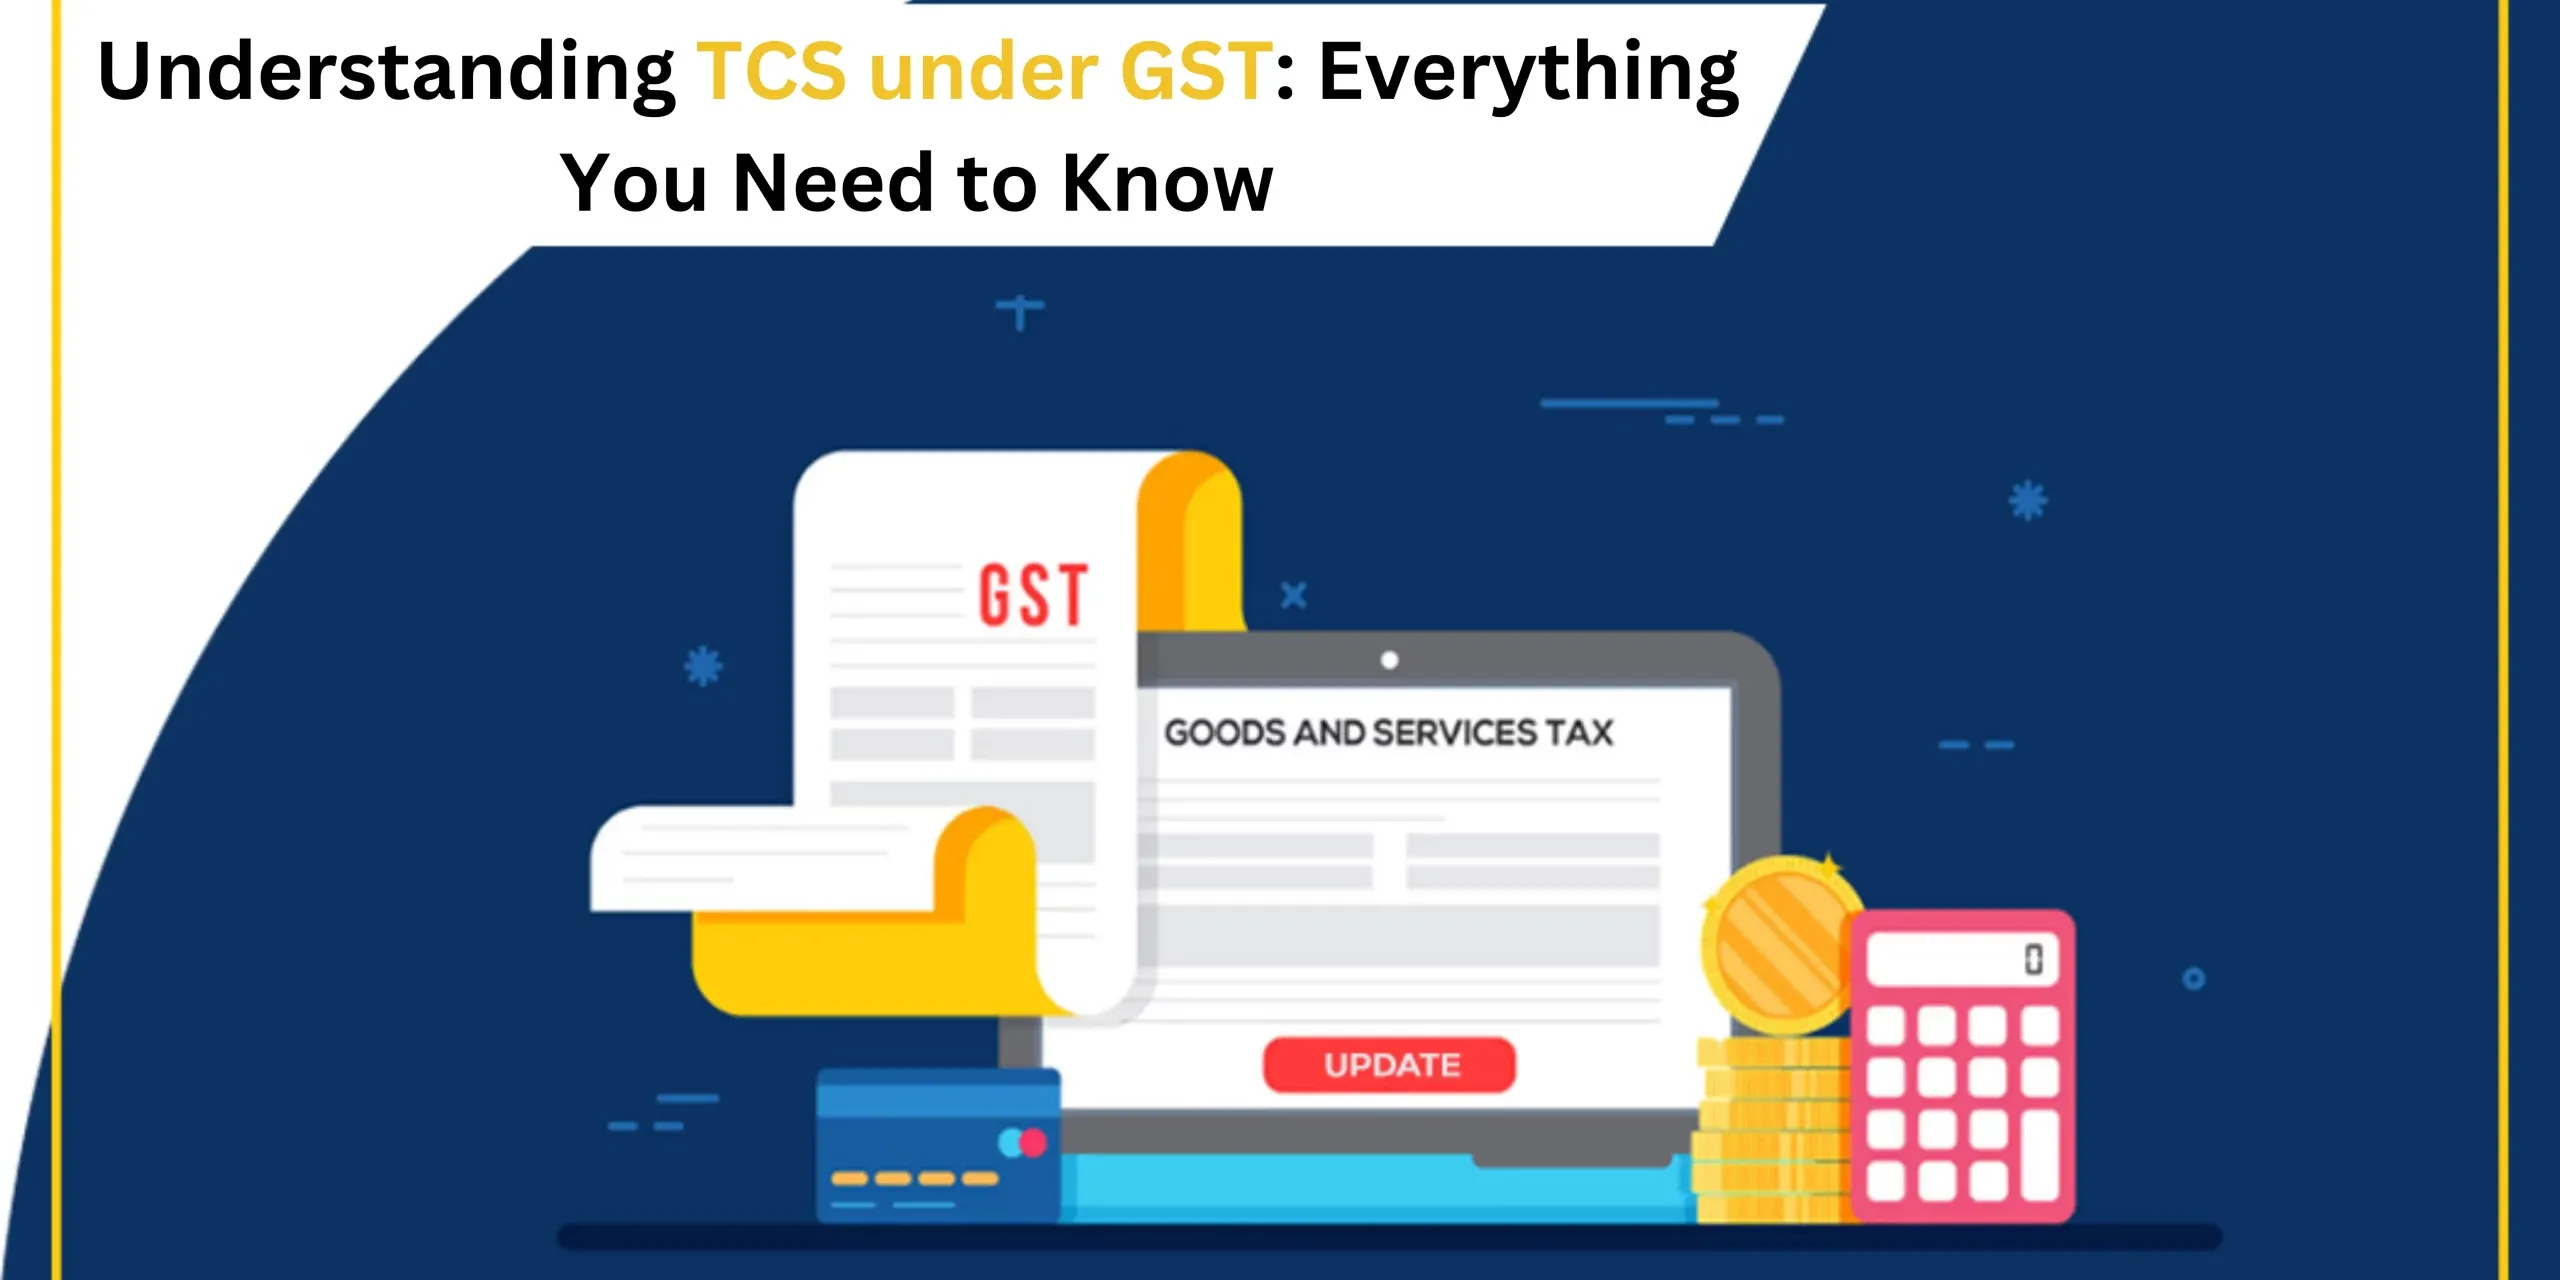 Understanding TCS under GST: Everything You Need to Know